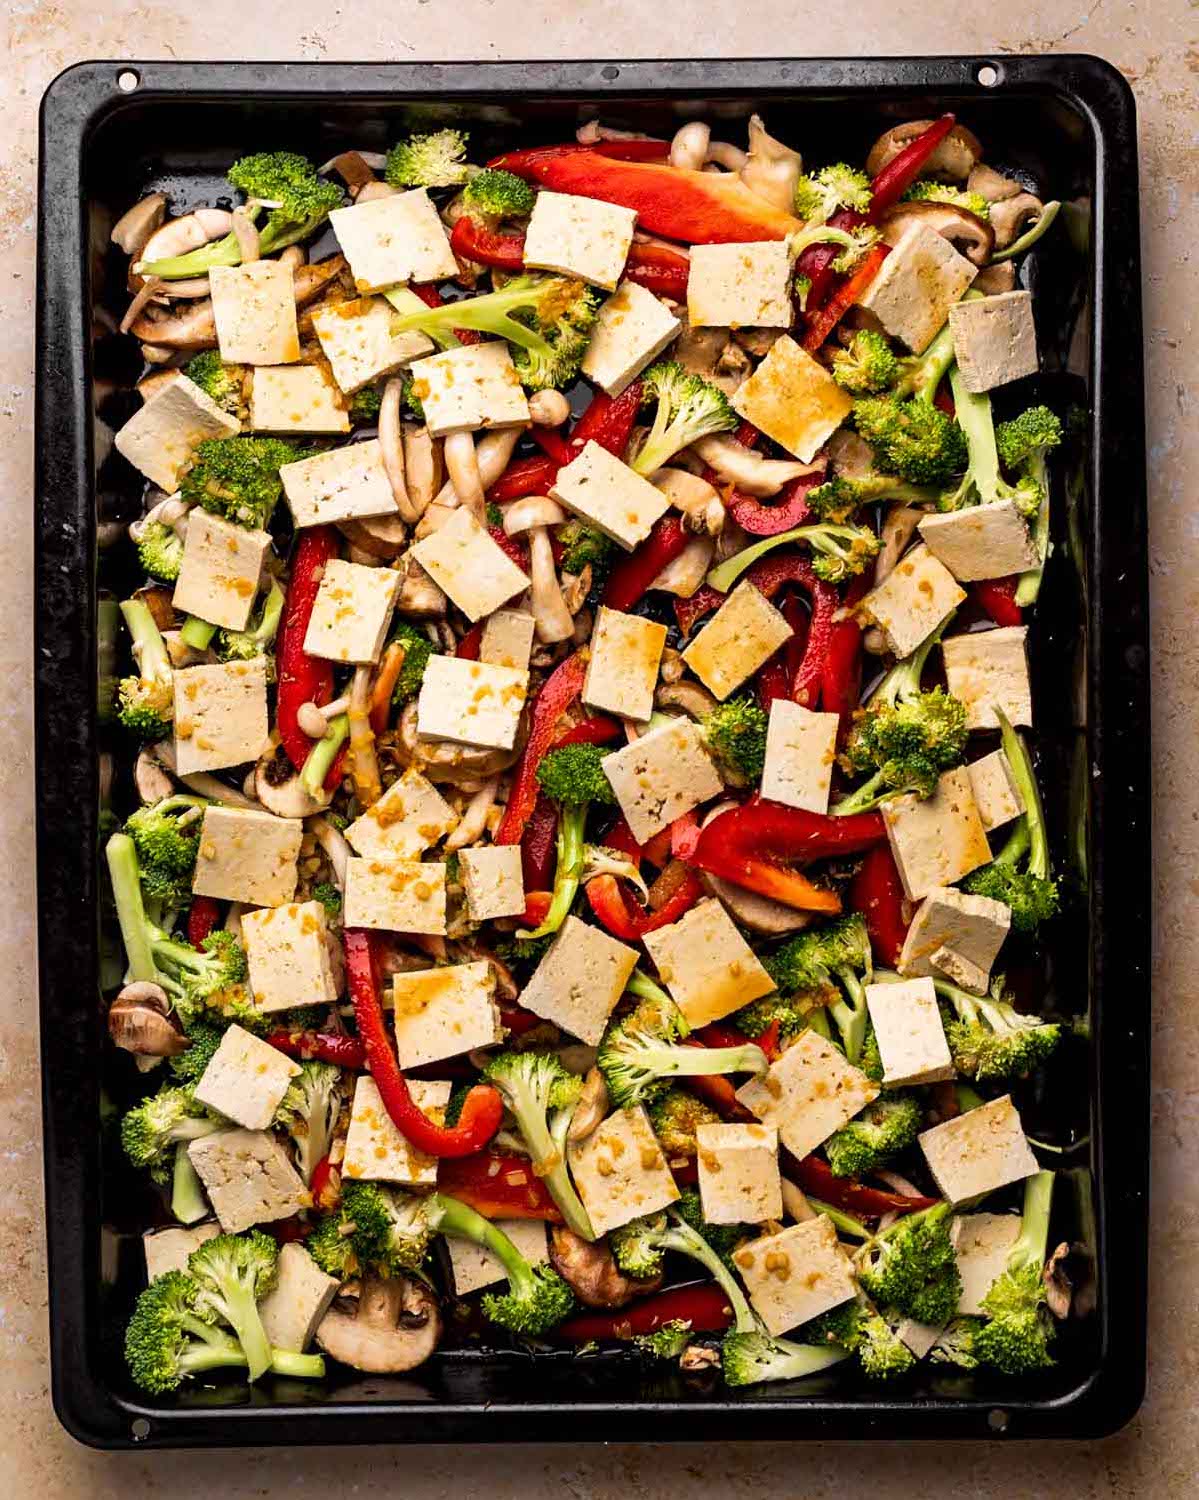 An overhead shot of a baking sheet of veggies with sliced tofu pieces.